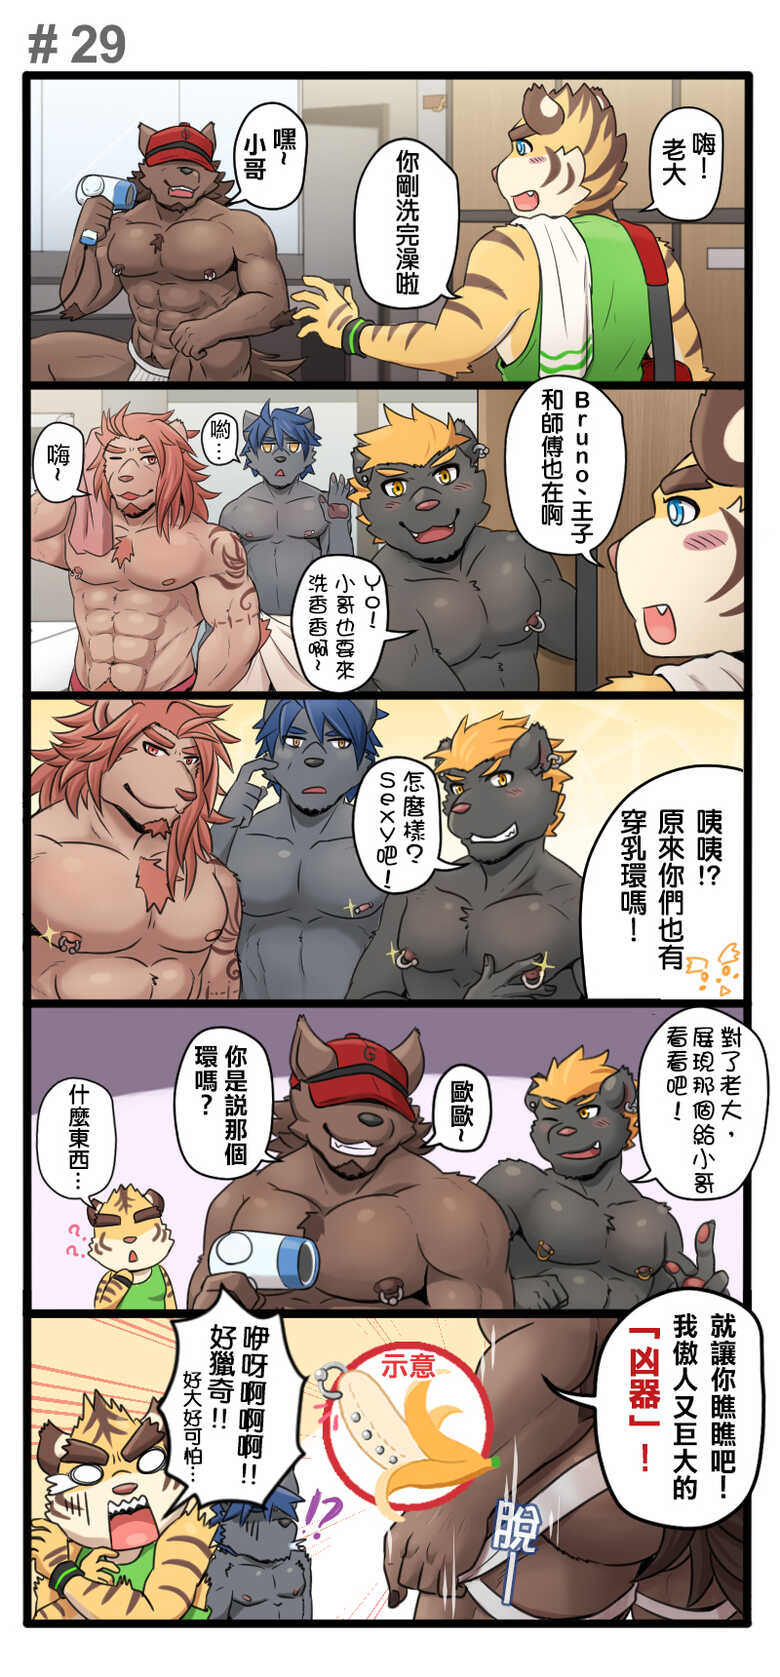 [Ripple Moon] Gym Pals (健身小哥) (Ongoing) [Chinese] [连载中] - Page 35